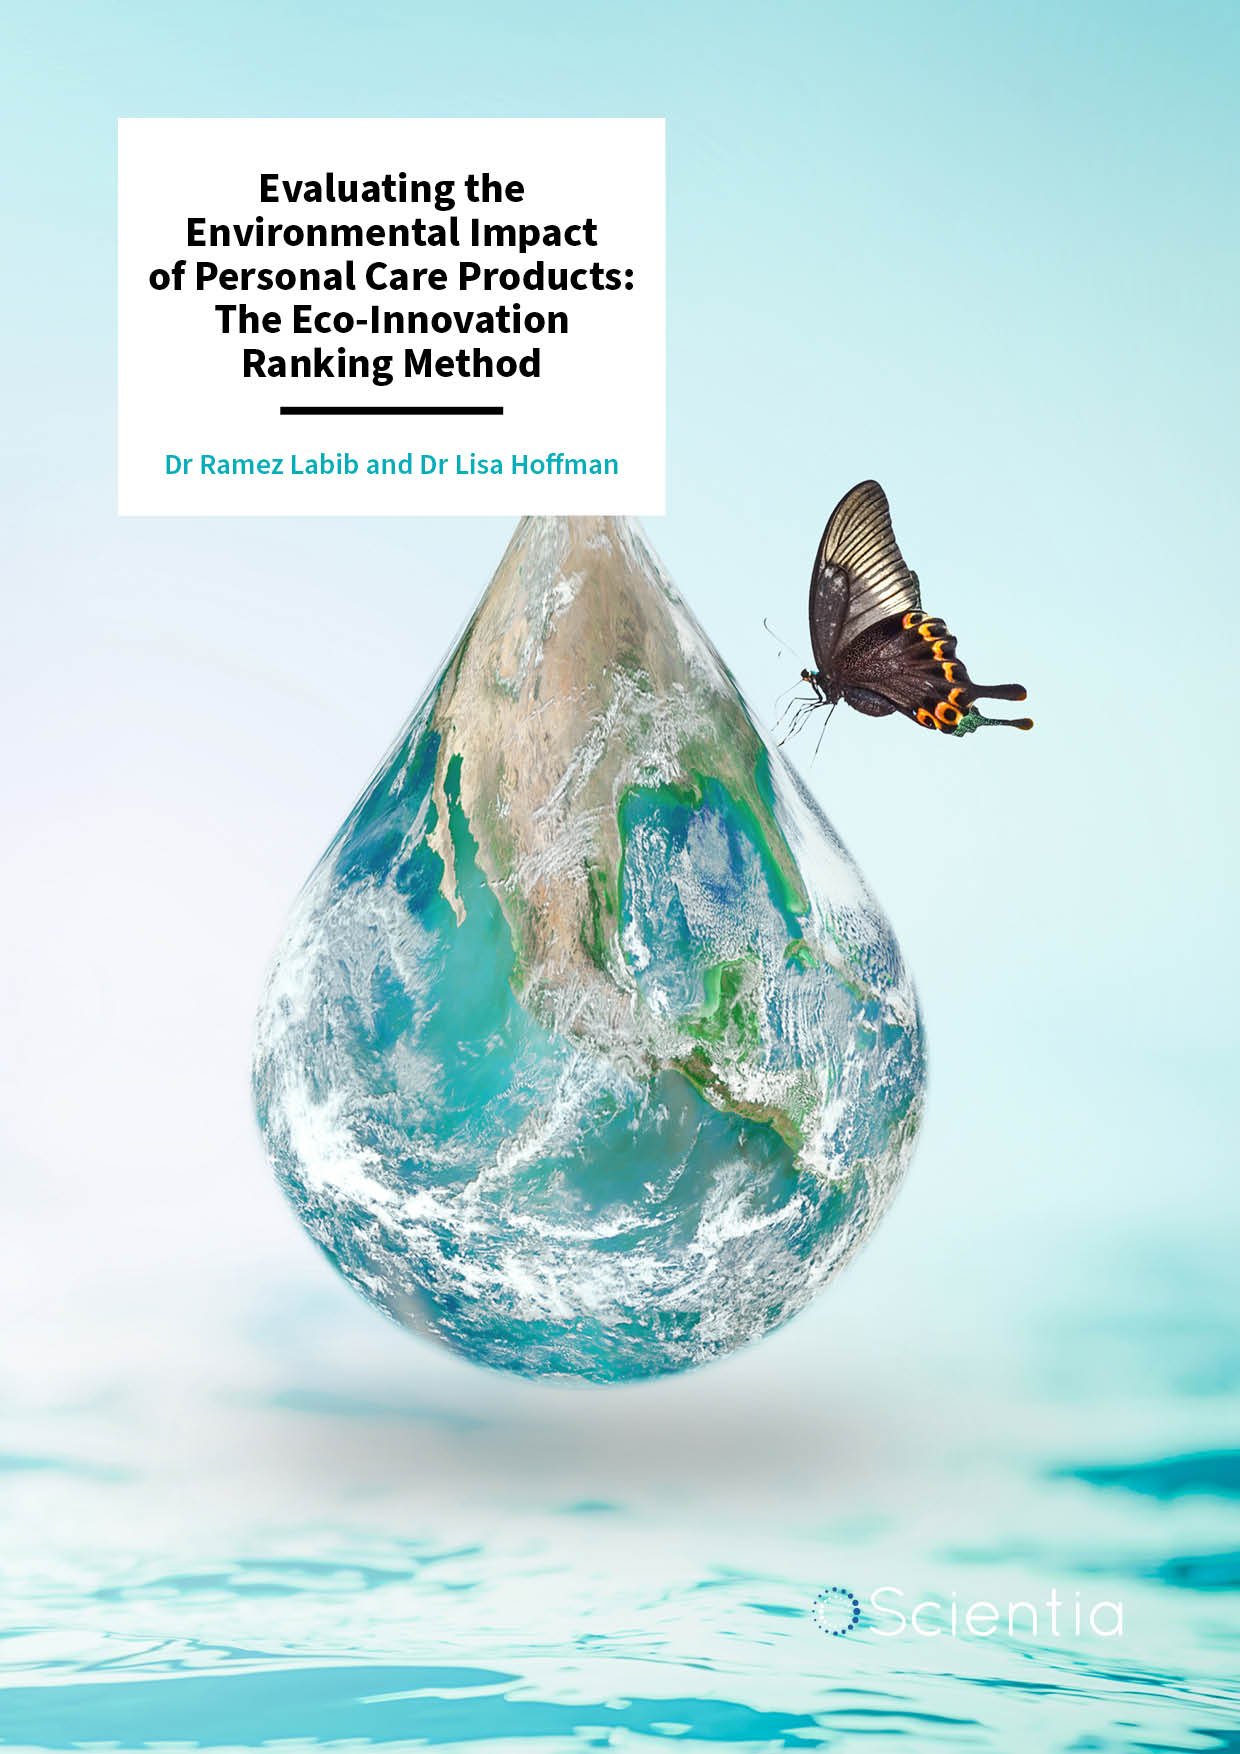 Dr Ramez Labib – Dr Lisa Hoffman | Evaluating the Environmental Impact of Personal Care Products: The Eco-Innovation Ranking Method